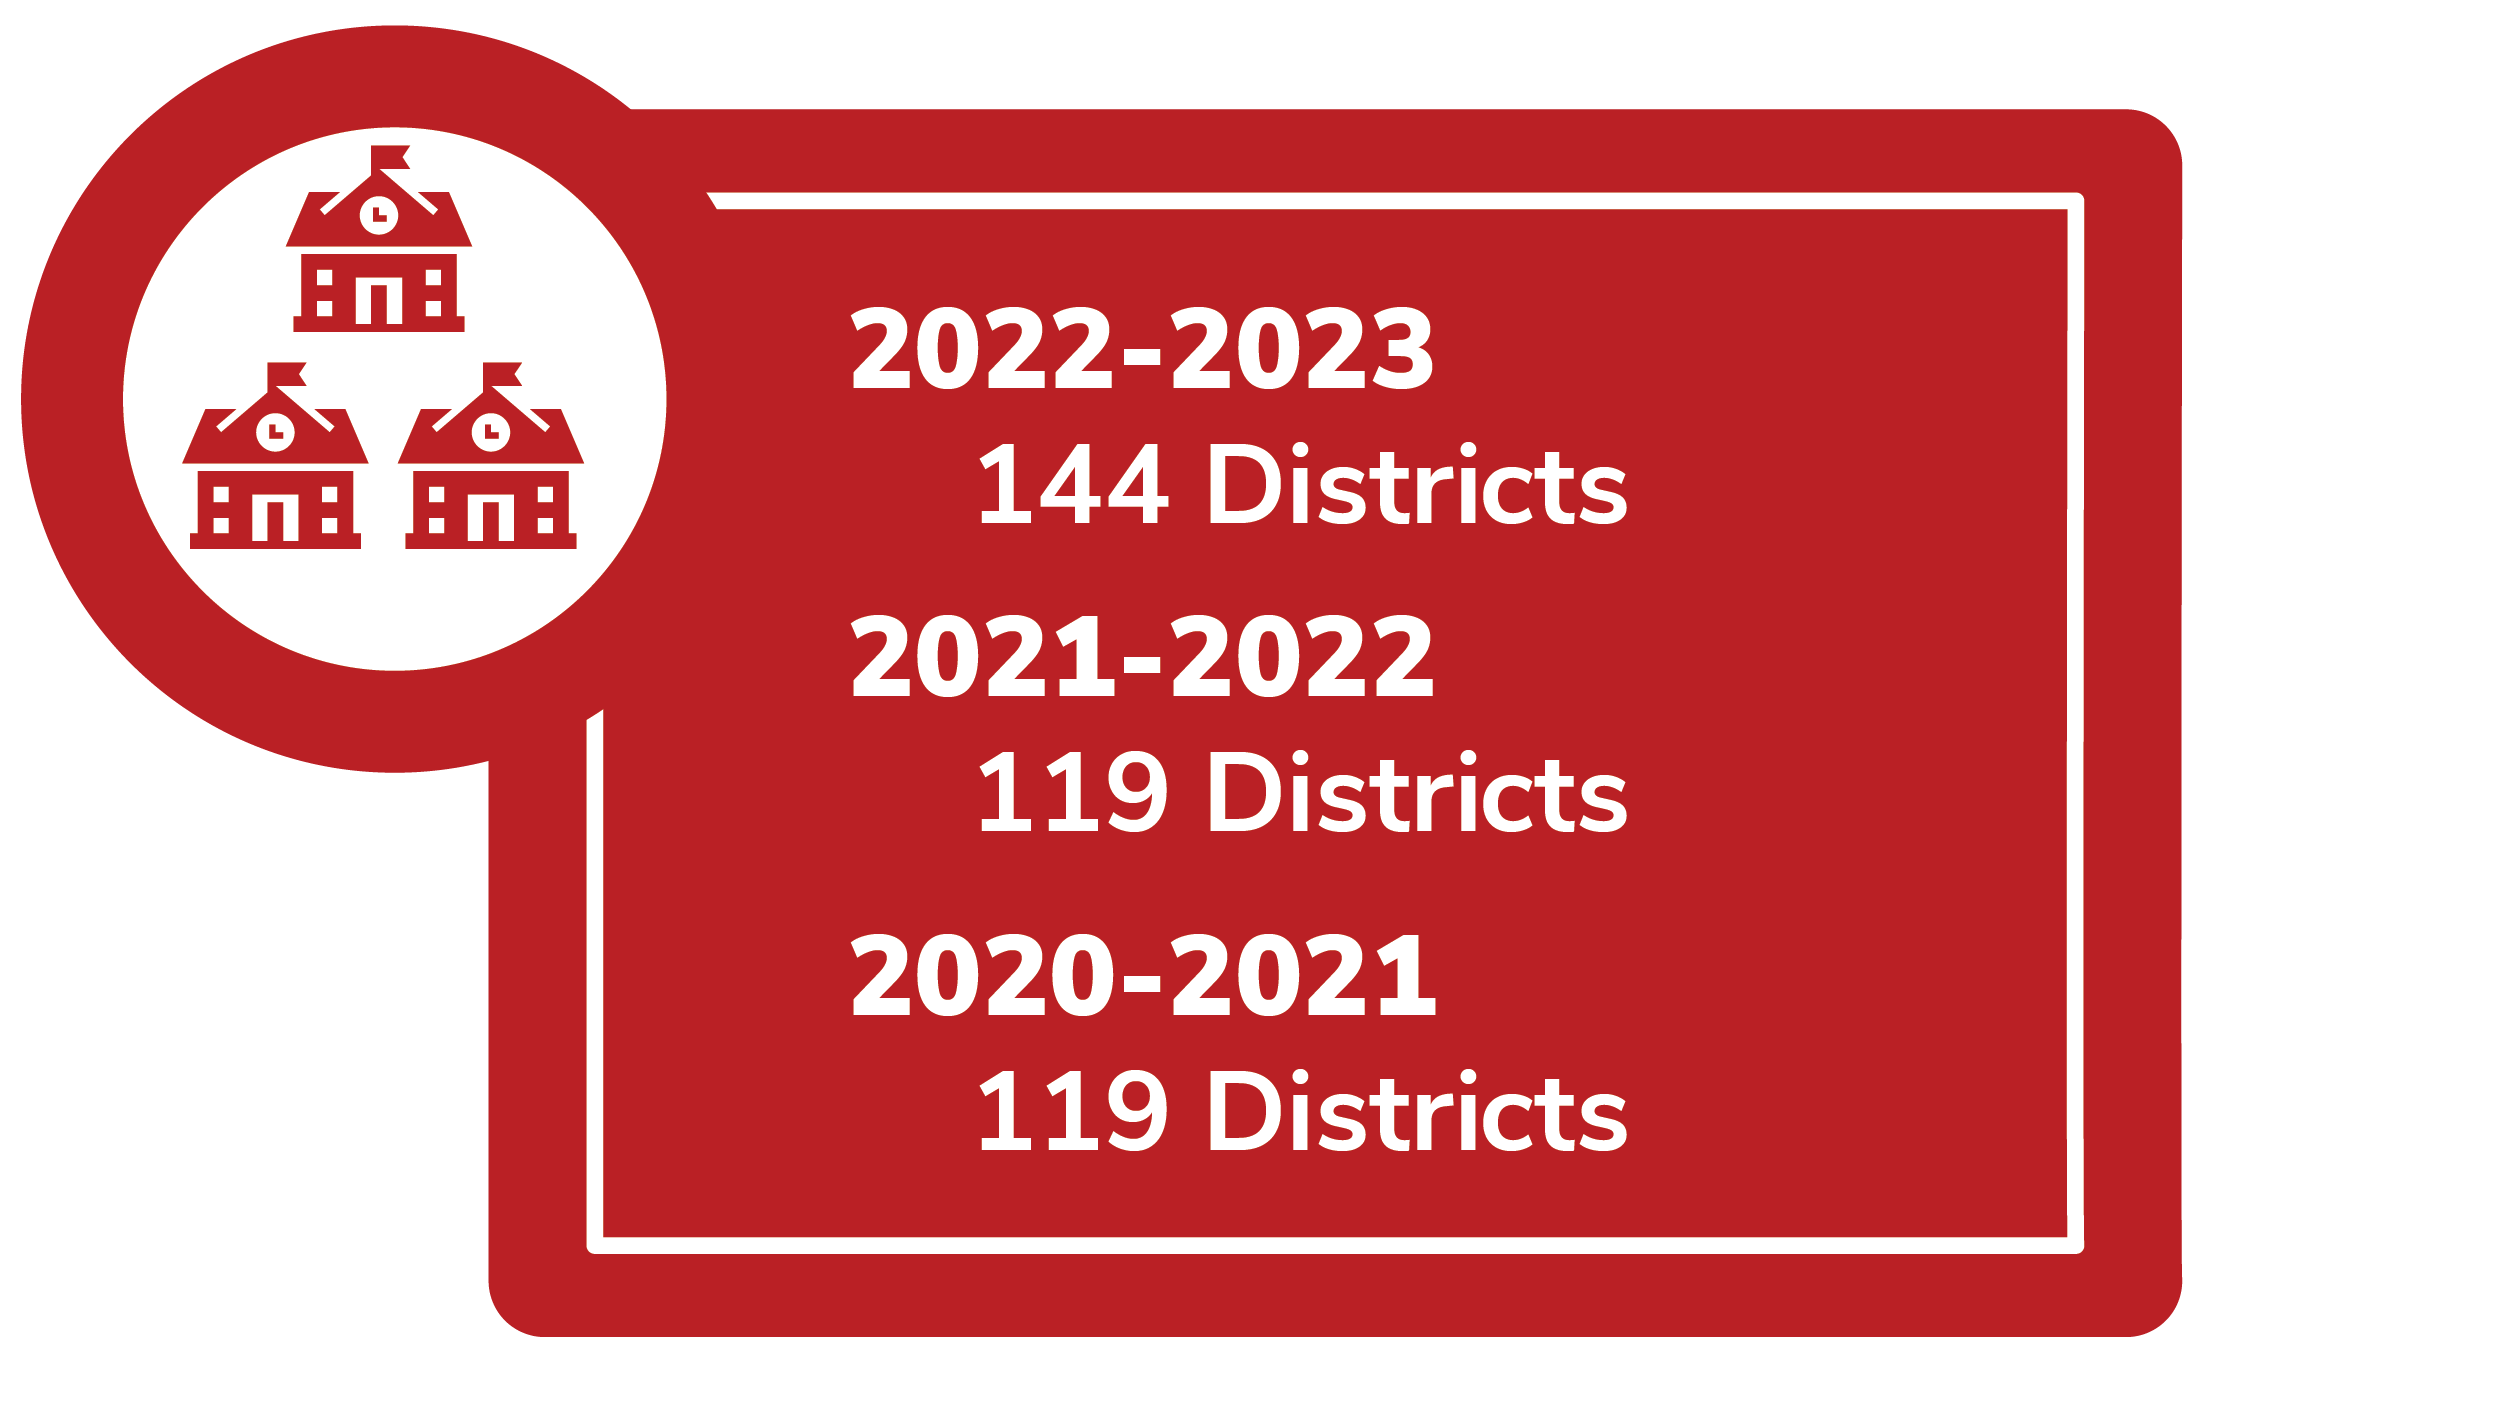 2022-2023 there were 144 districts